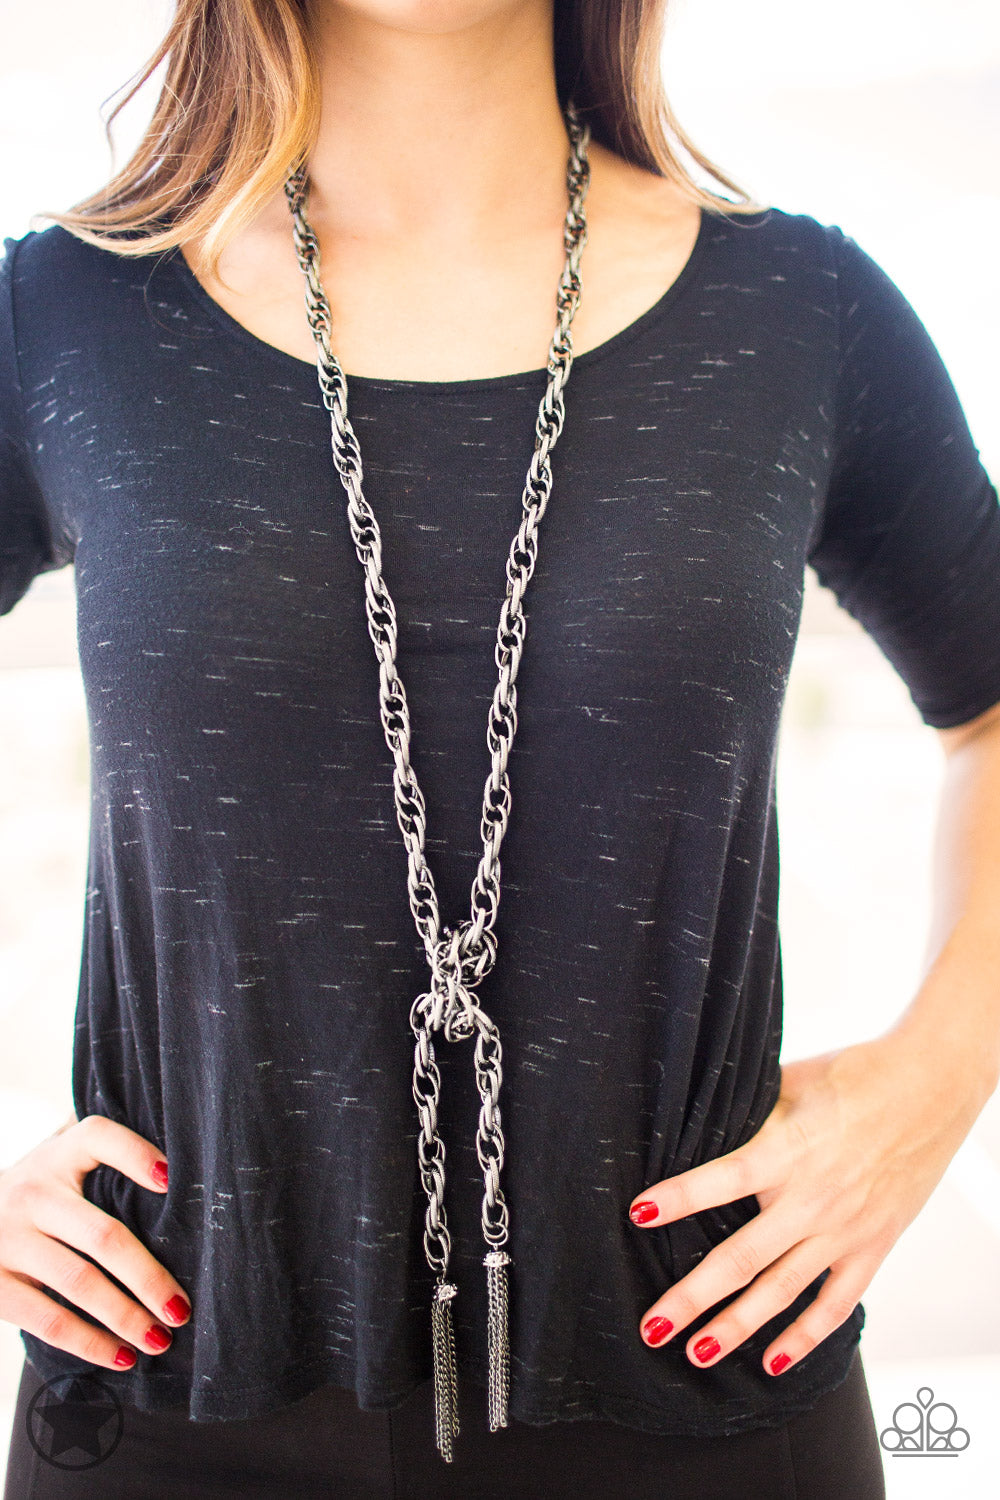 Paparazzi Accessories Scarfed for Attention - Gunmetal Blockbuster Necklaces - Lady T Accessories